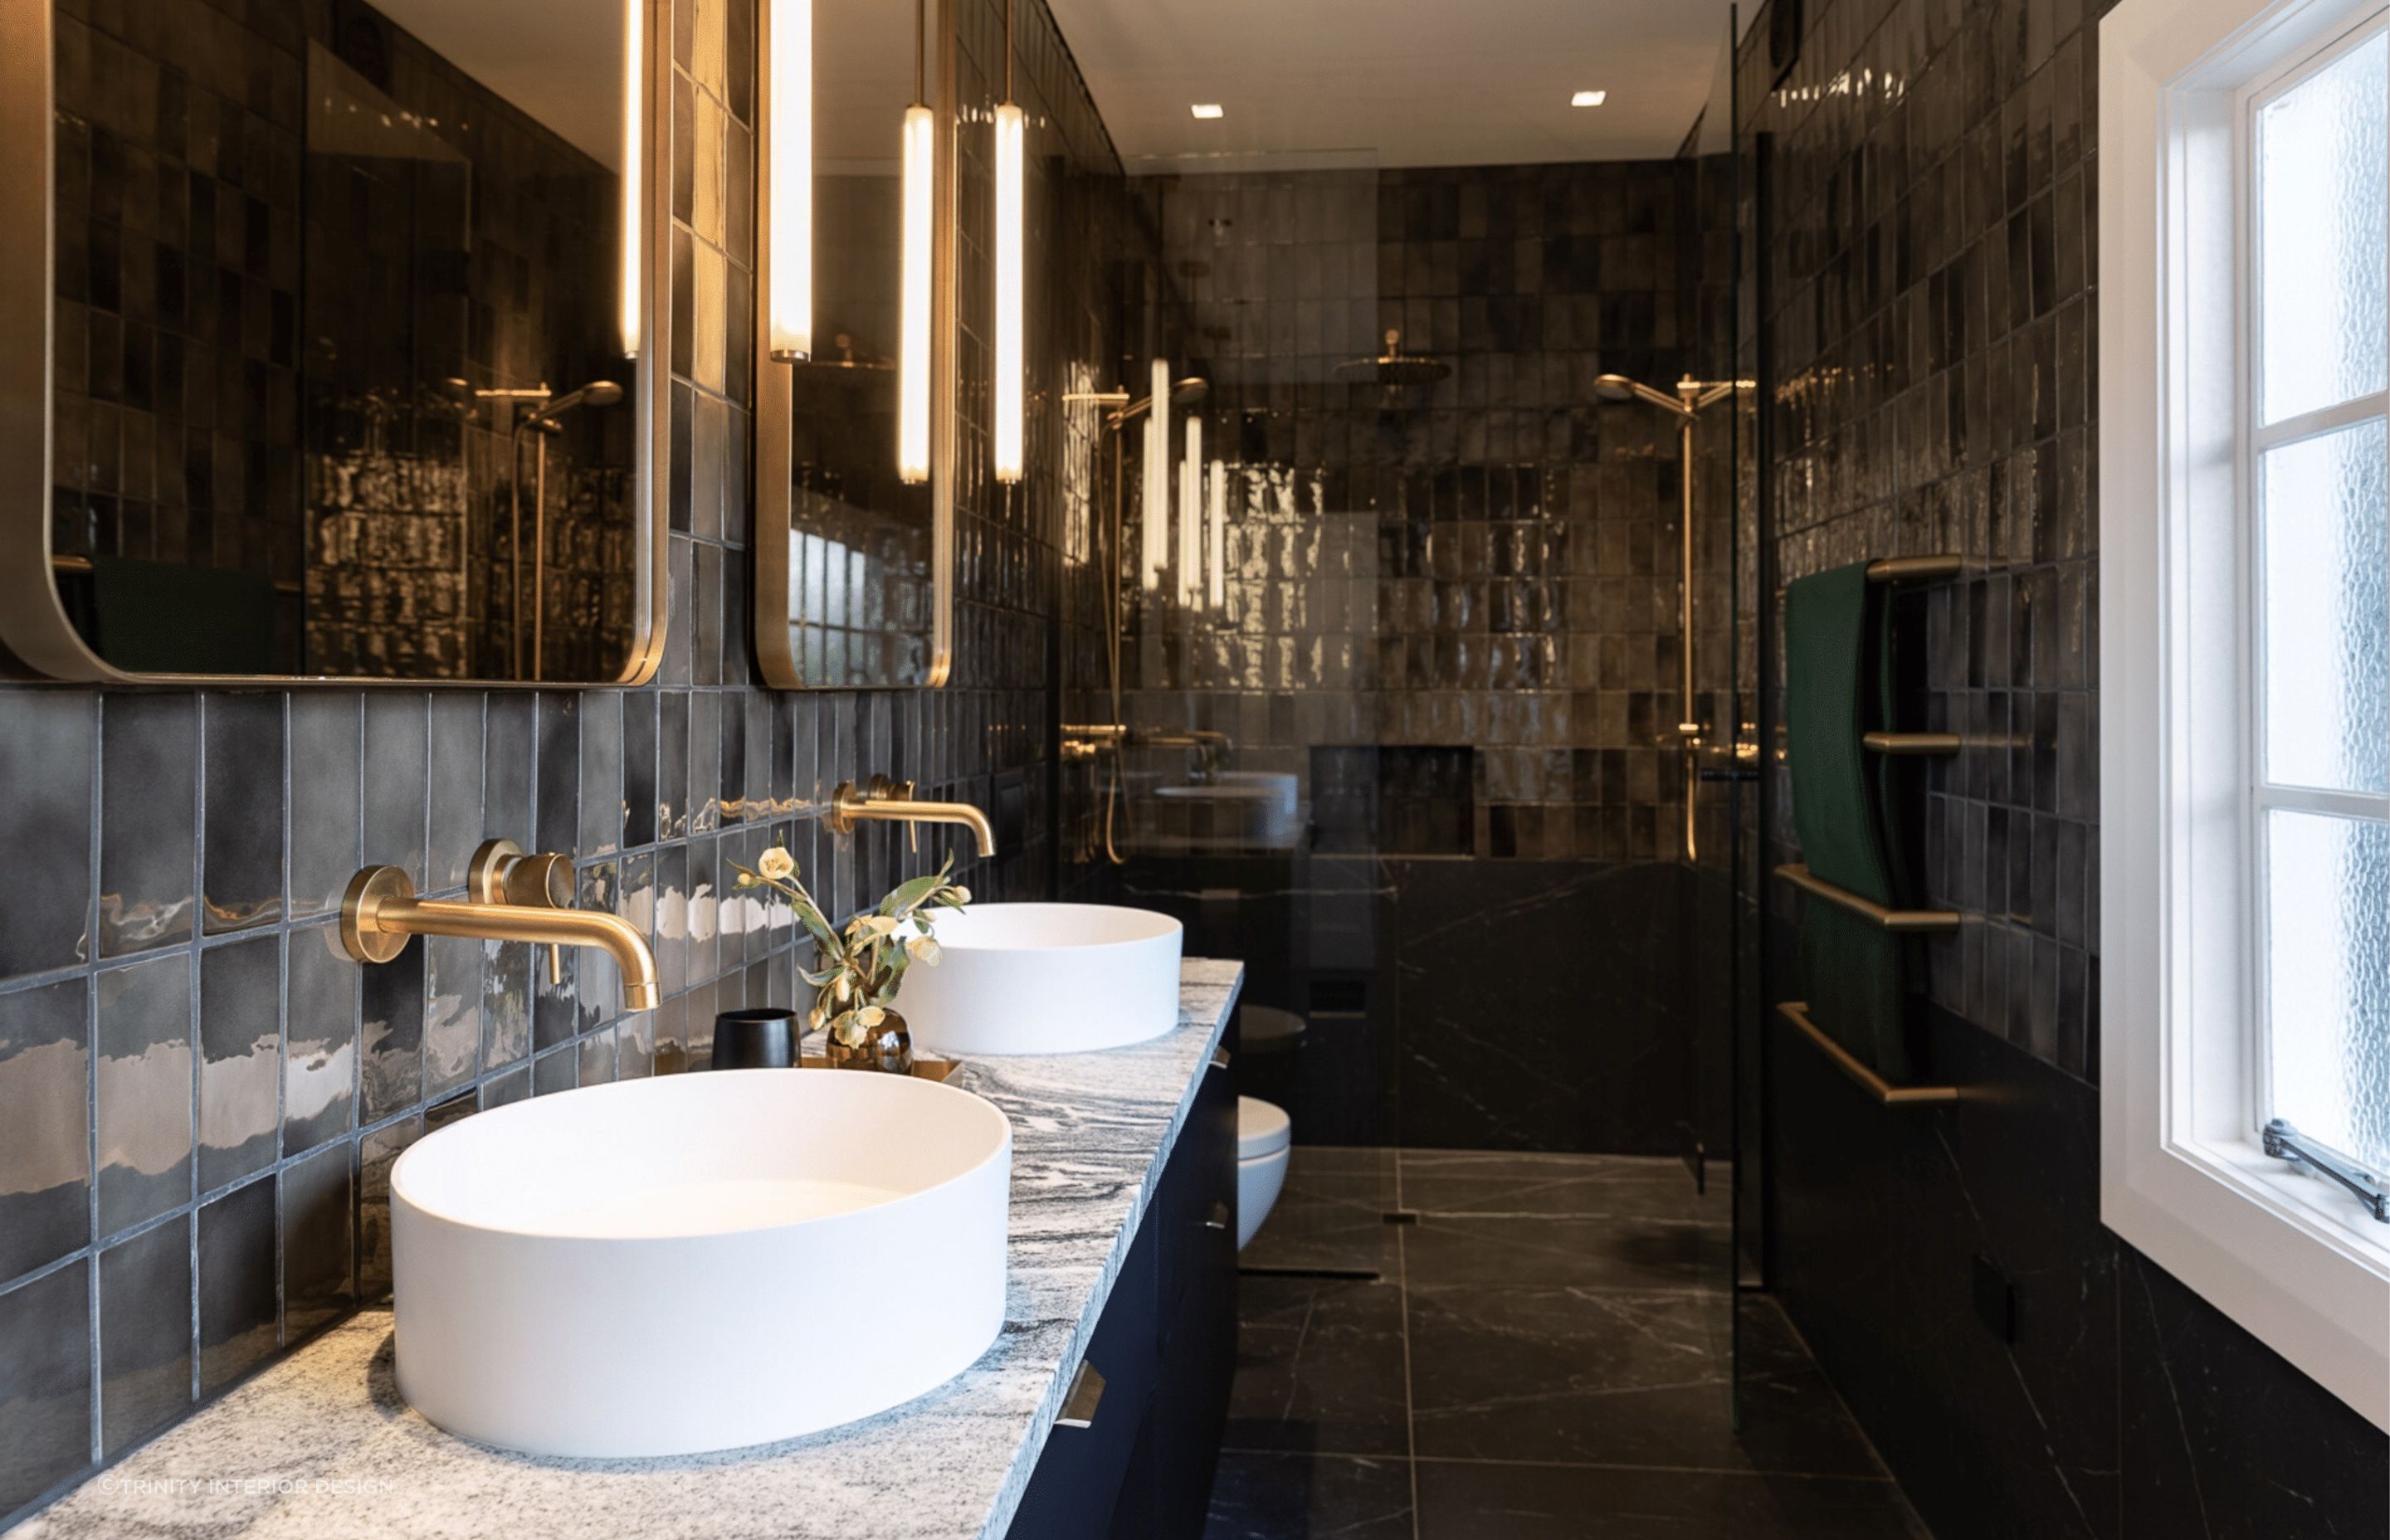 The glossy tiles of this bathroom in Mount Eden adds an undeniable shine.